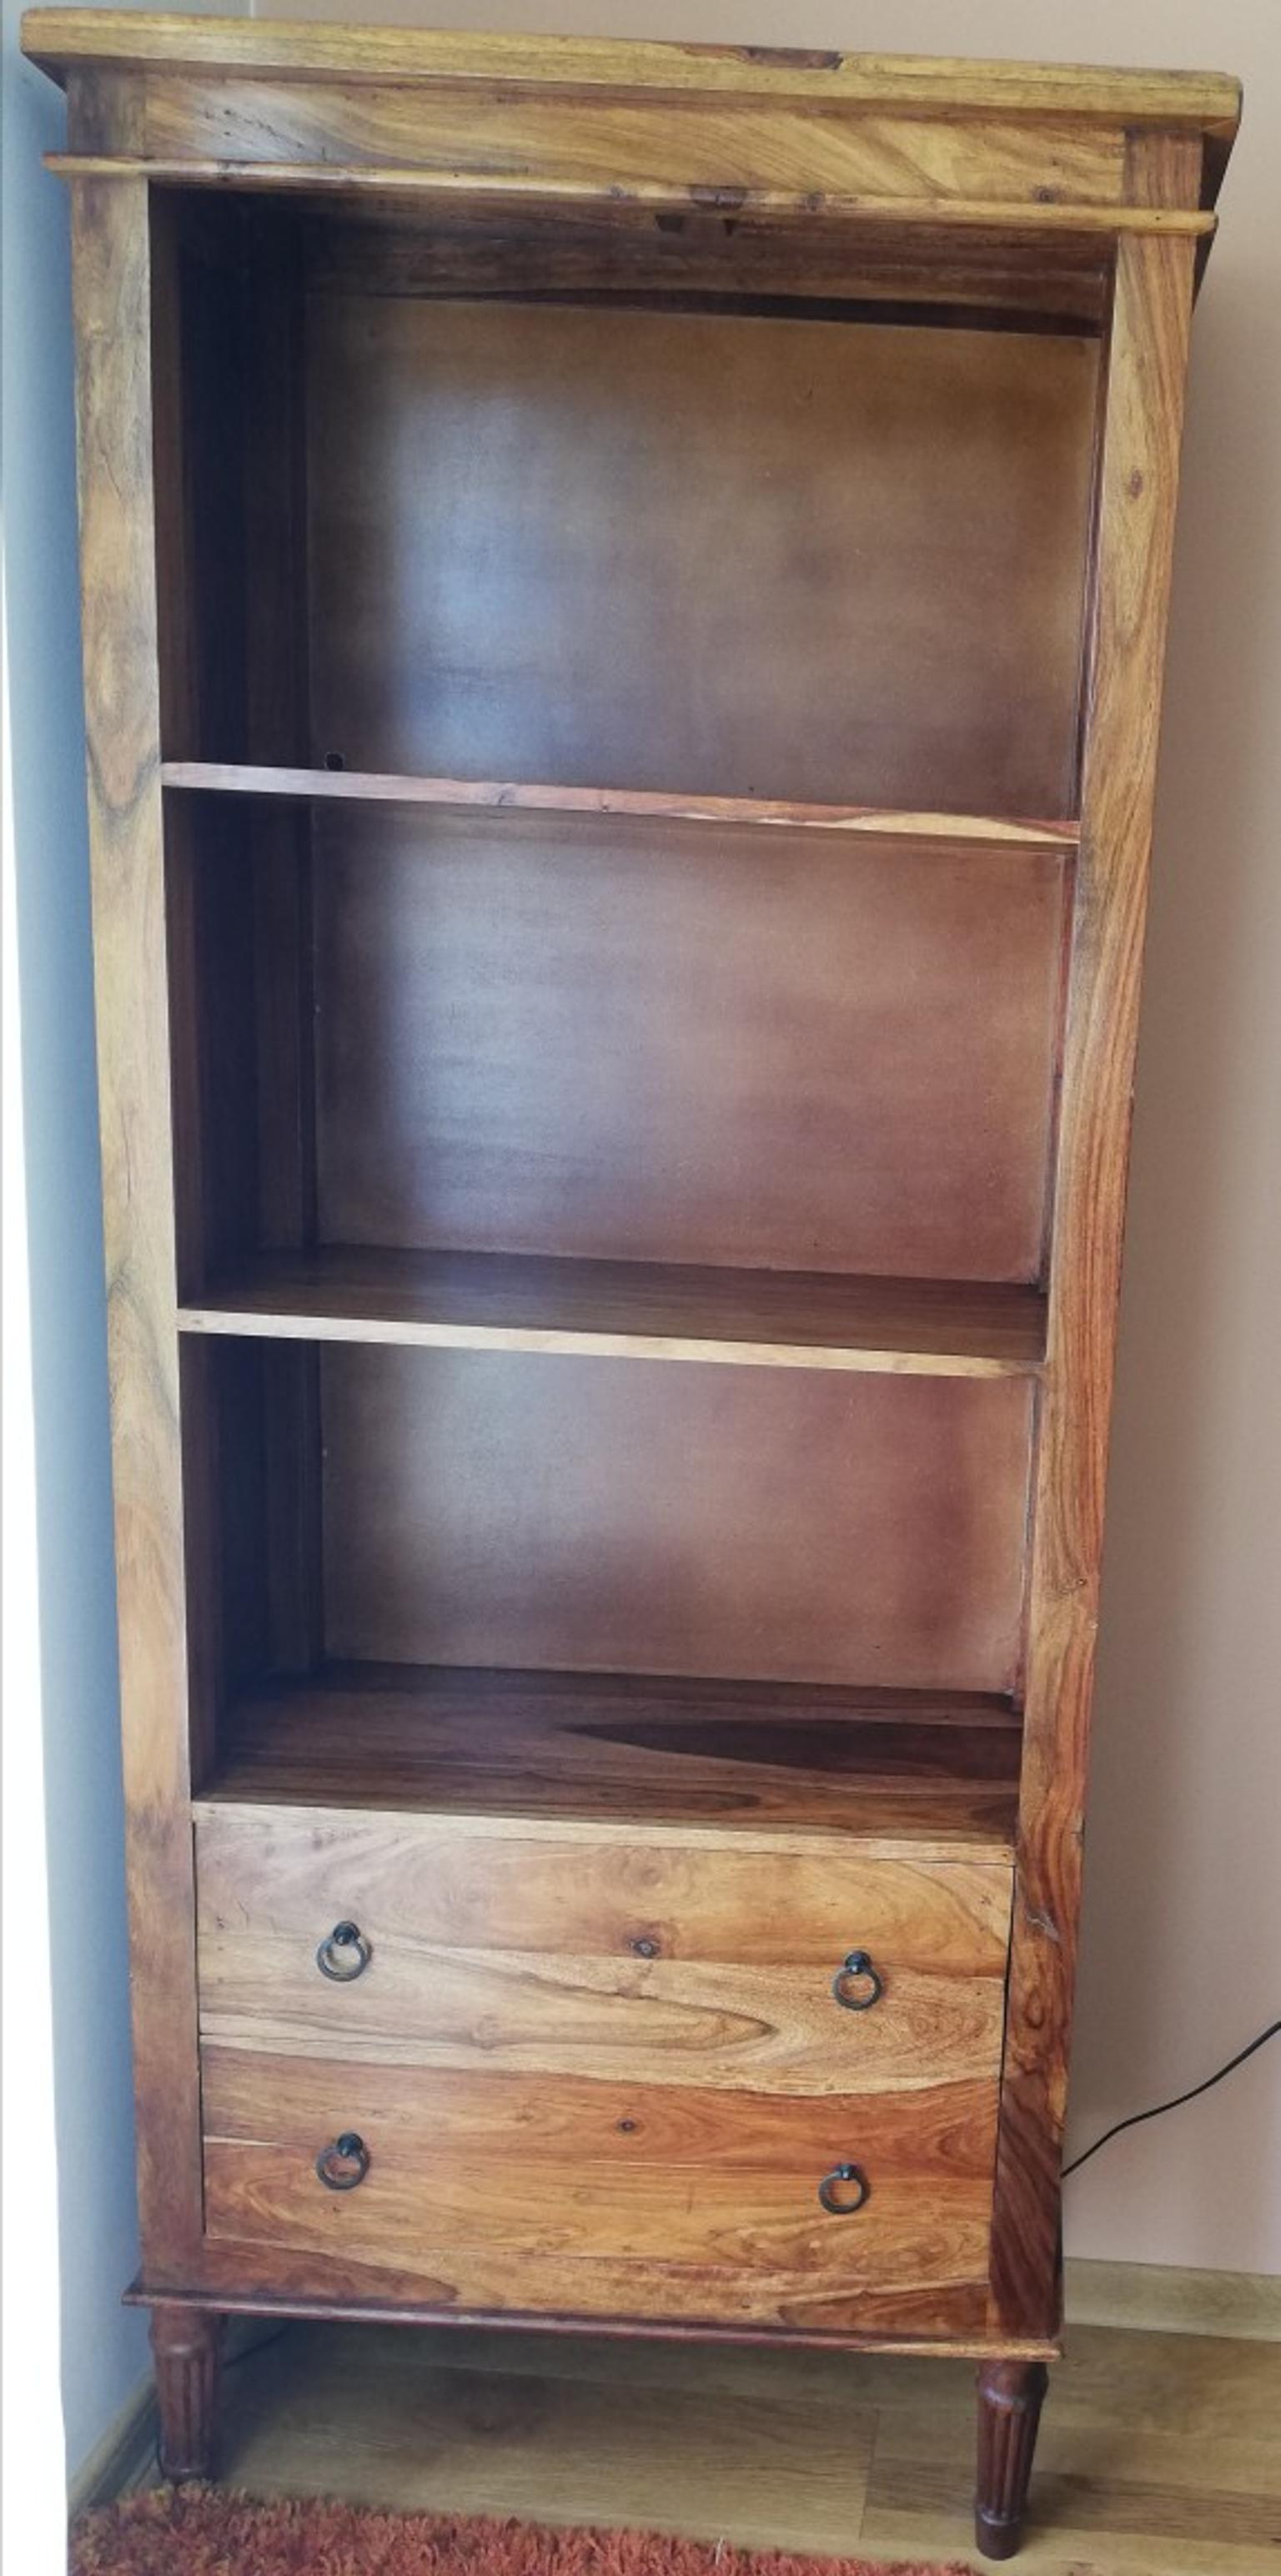 Indian Wood Bookcase In Bs23 Uphill For 50 00 For Sale Shpock